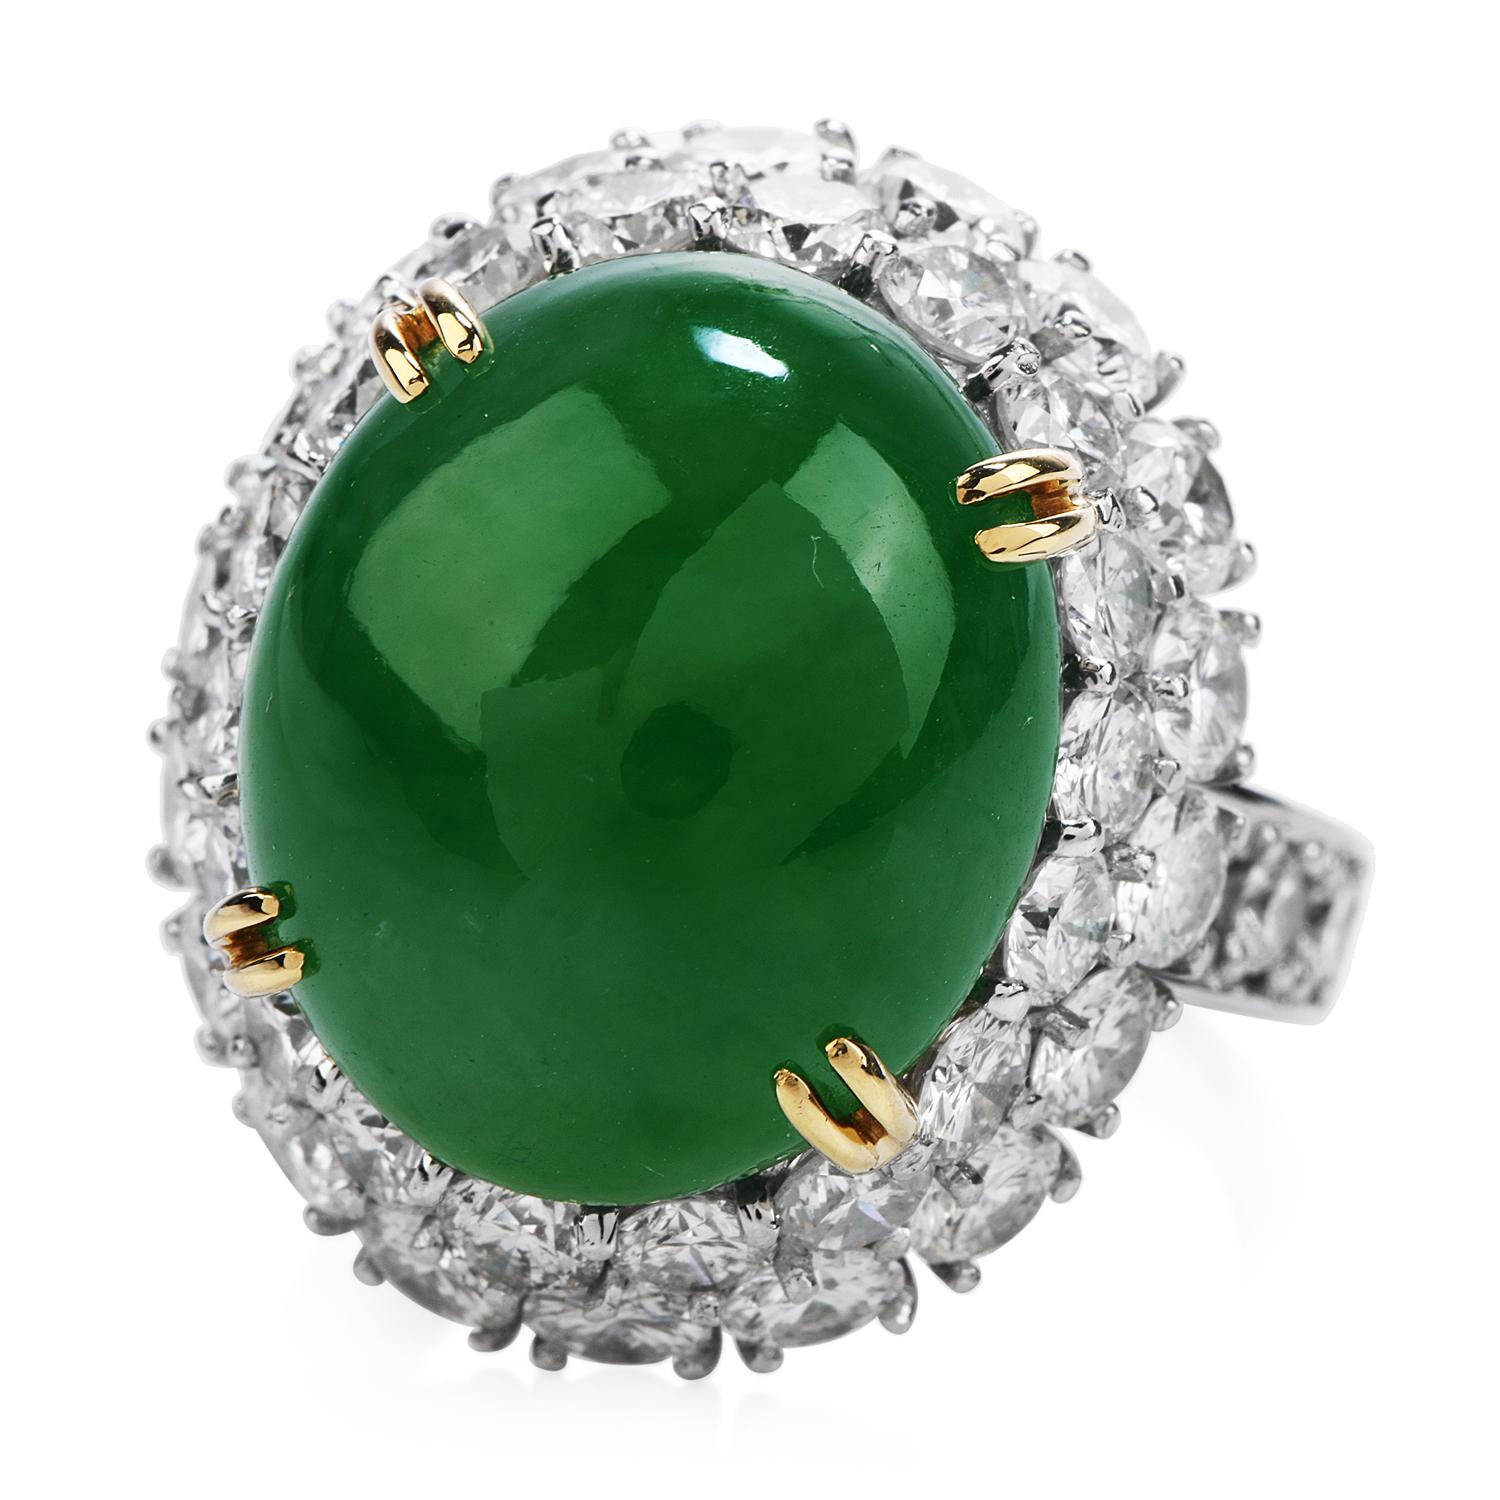 A Very fine quality Magnificent Green Imperial Jade with Luxurious Extra white Diamonds all Around!

This divine Oval Shaped Cocktail Ring is Crafted in Solid Platinum with 18K Yellow Gold Prongs,

weights 19.1 grams and the top measures 20 mm x 23